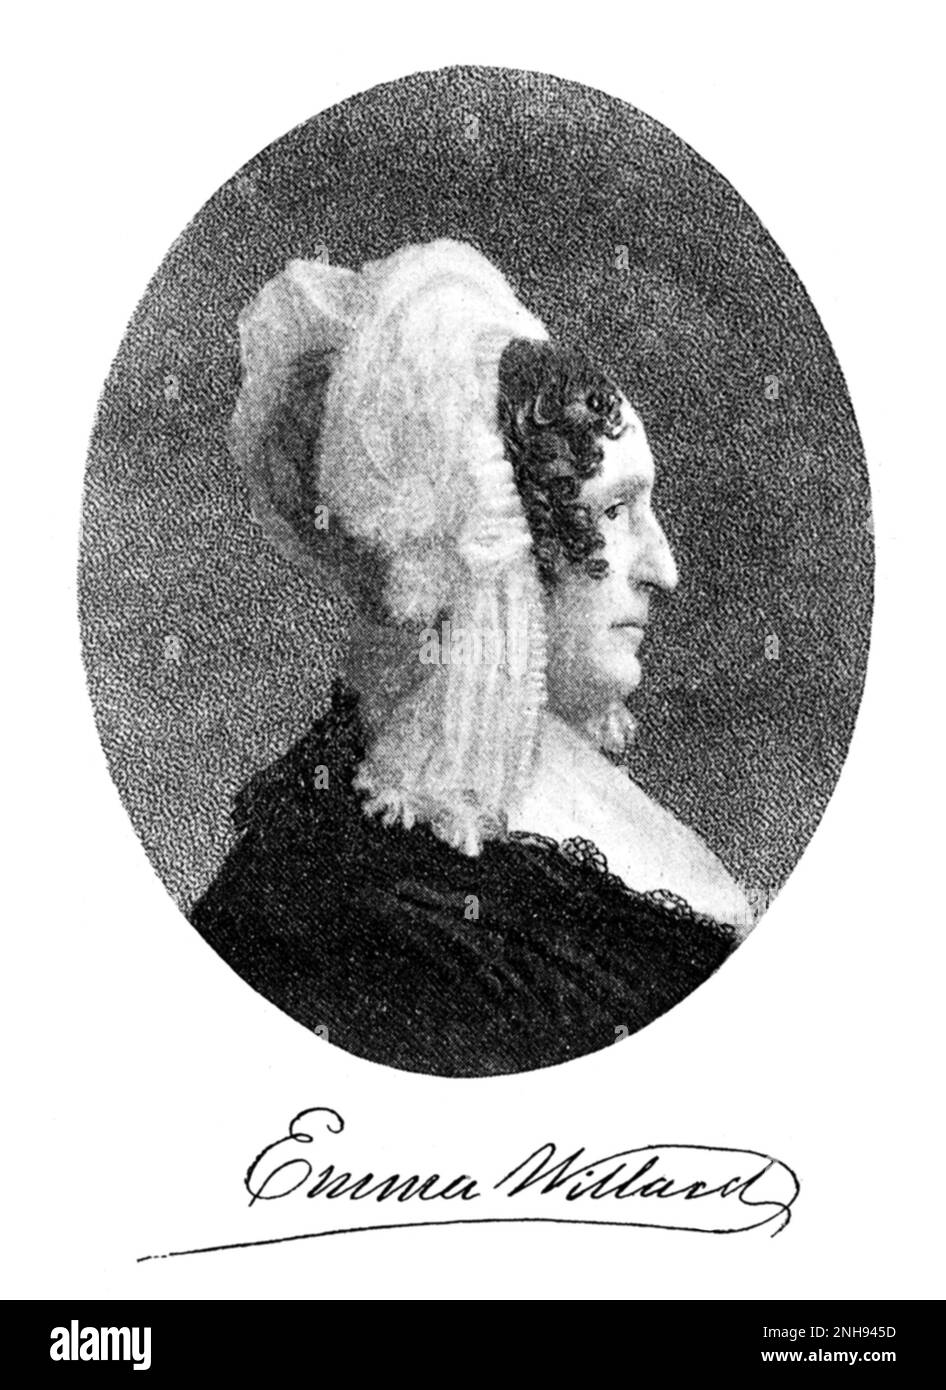 Emma Hart Willard (1787-1870) was an American female education activist who founded the first school for women's higher education, the Troy Female Seminary in Troy, New York. With the success of her school, Willard was able to travel across the country and abroad, to promote education for women. Portrait from a leaflet, c. 1895./n/n Stock Photo